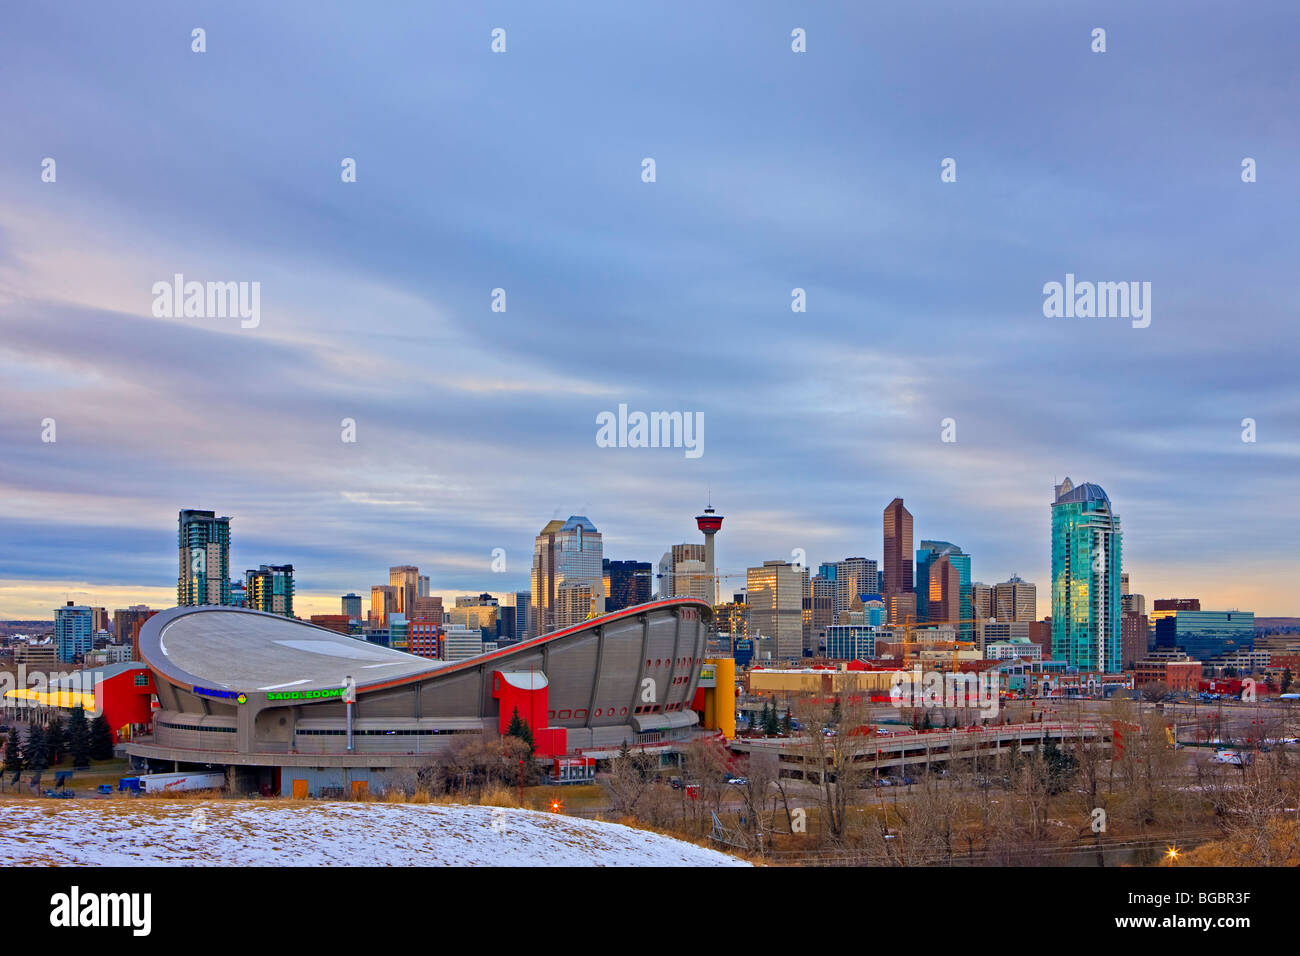 The Saddledome with high-rise buildings and the Calgary Tower in the background, City of Calgary, Alberta, Canada. Stock Photo